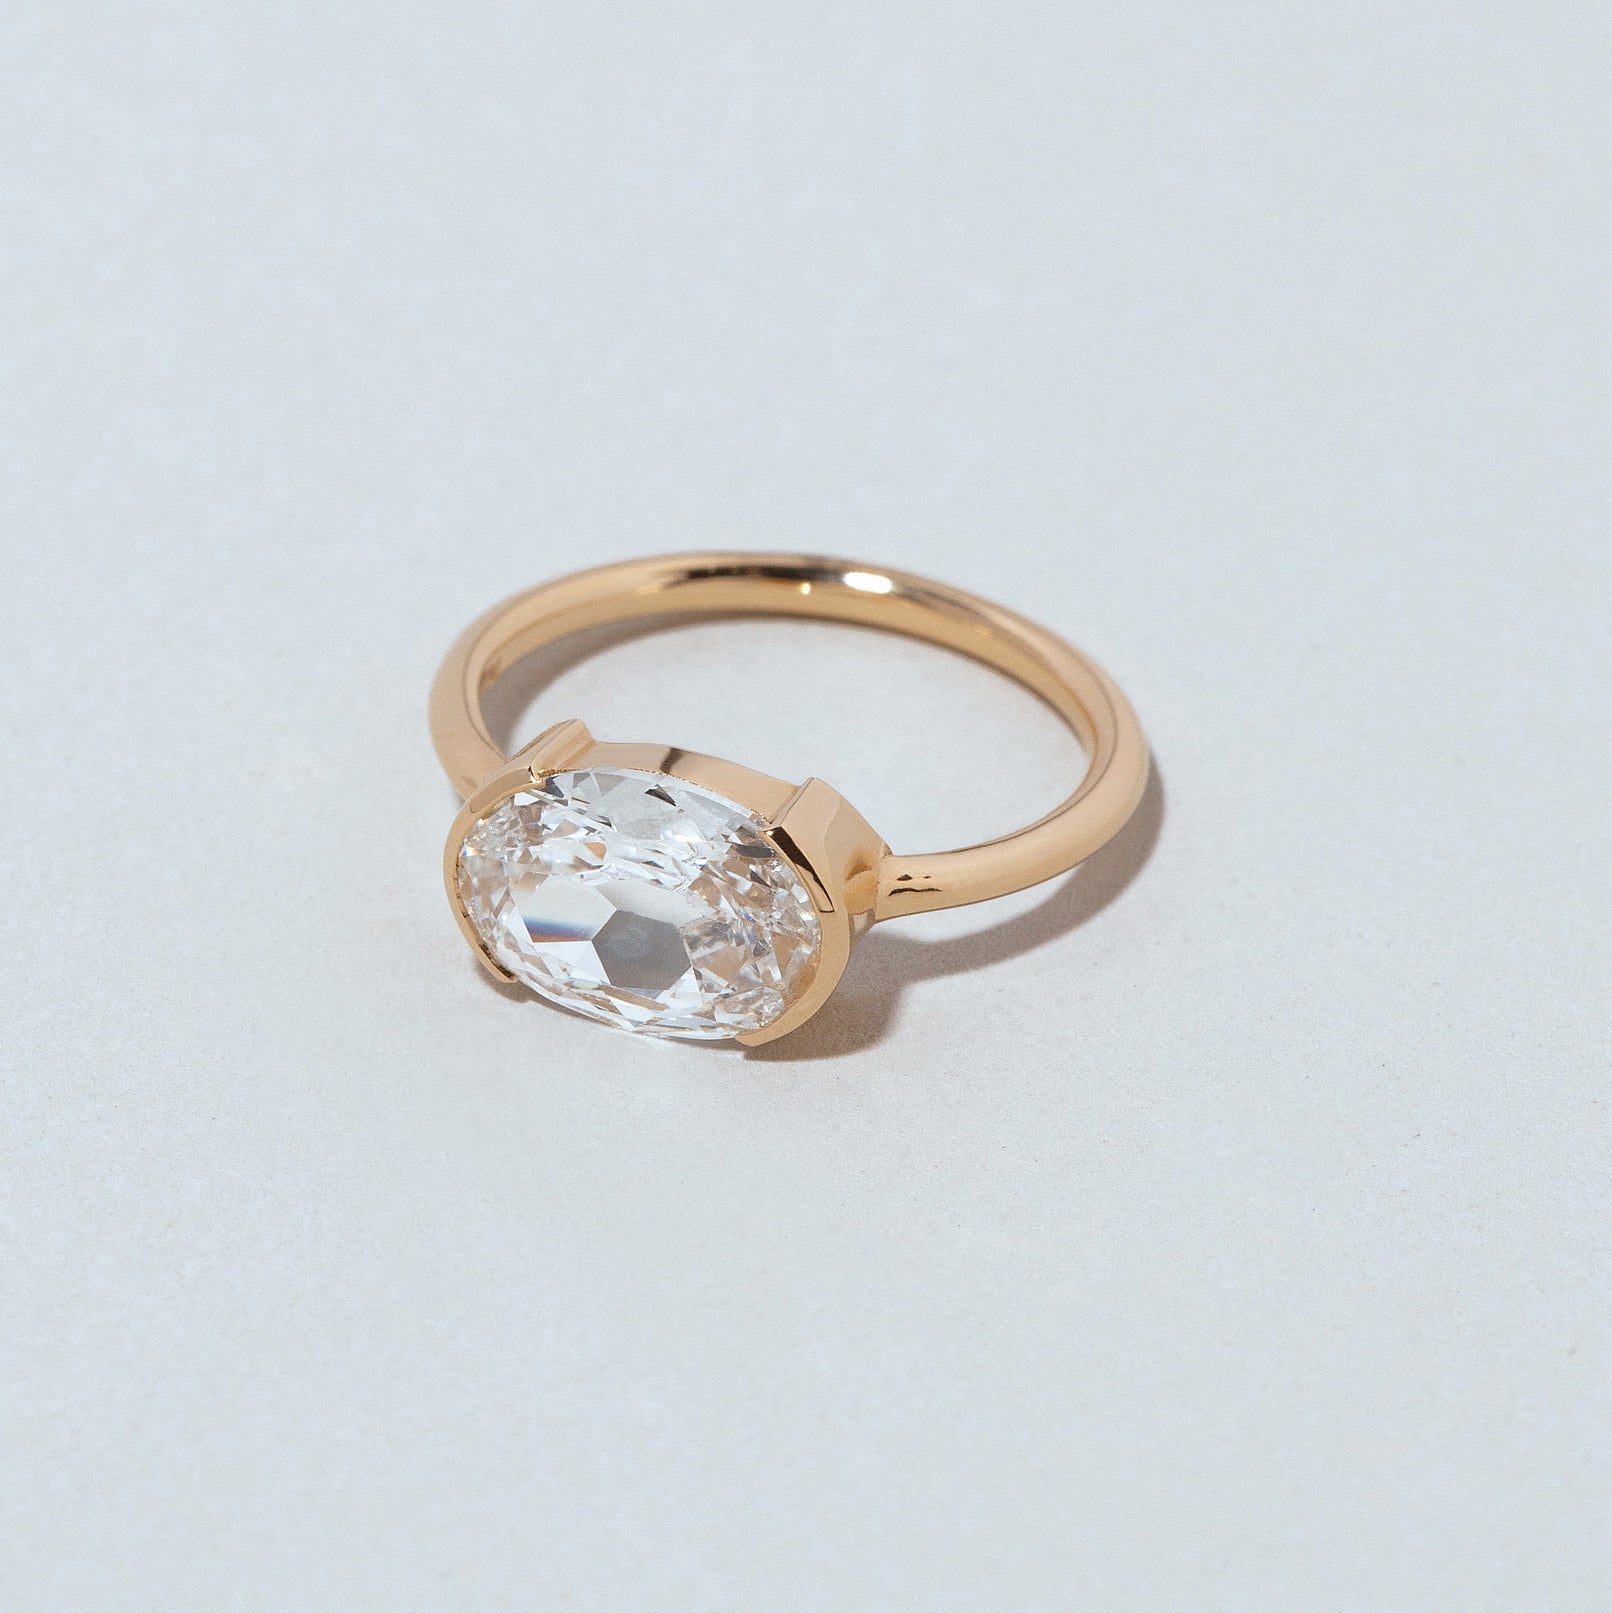 product_details::Starshine Ring on light colored background